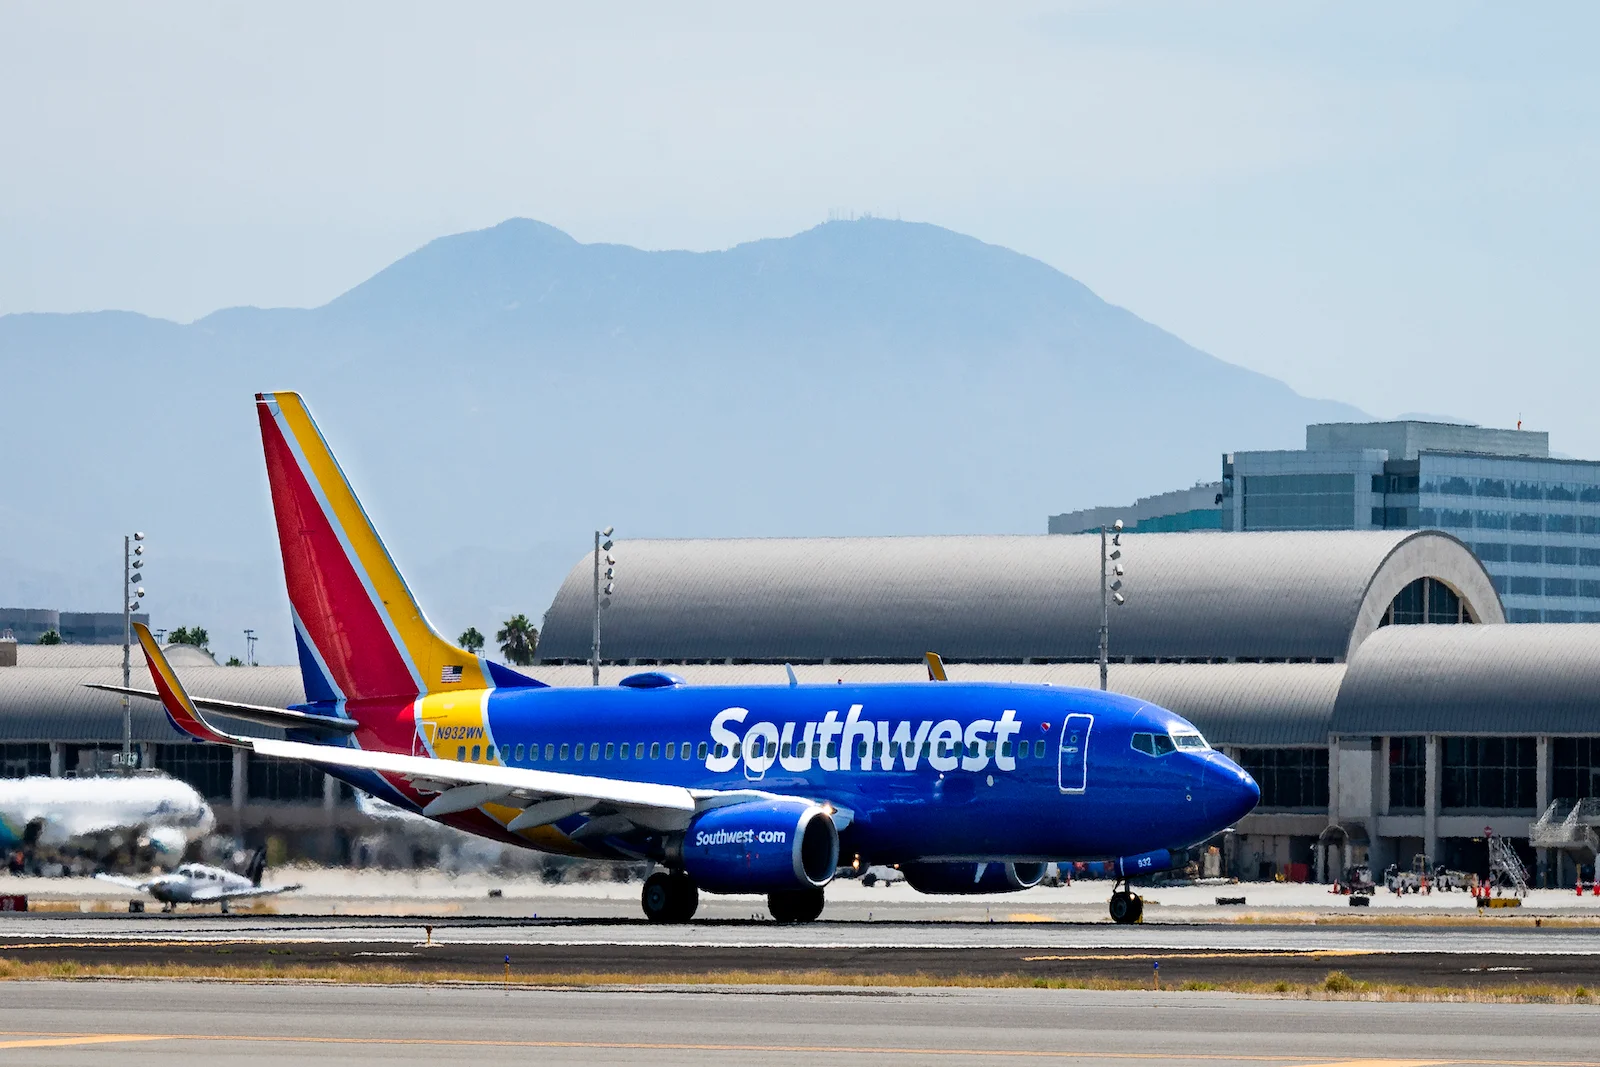 Is it still wise to book with Southwest Airlines after a major meltdown?